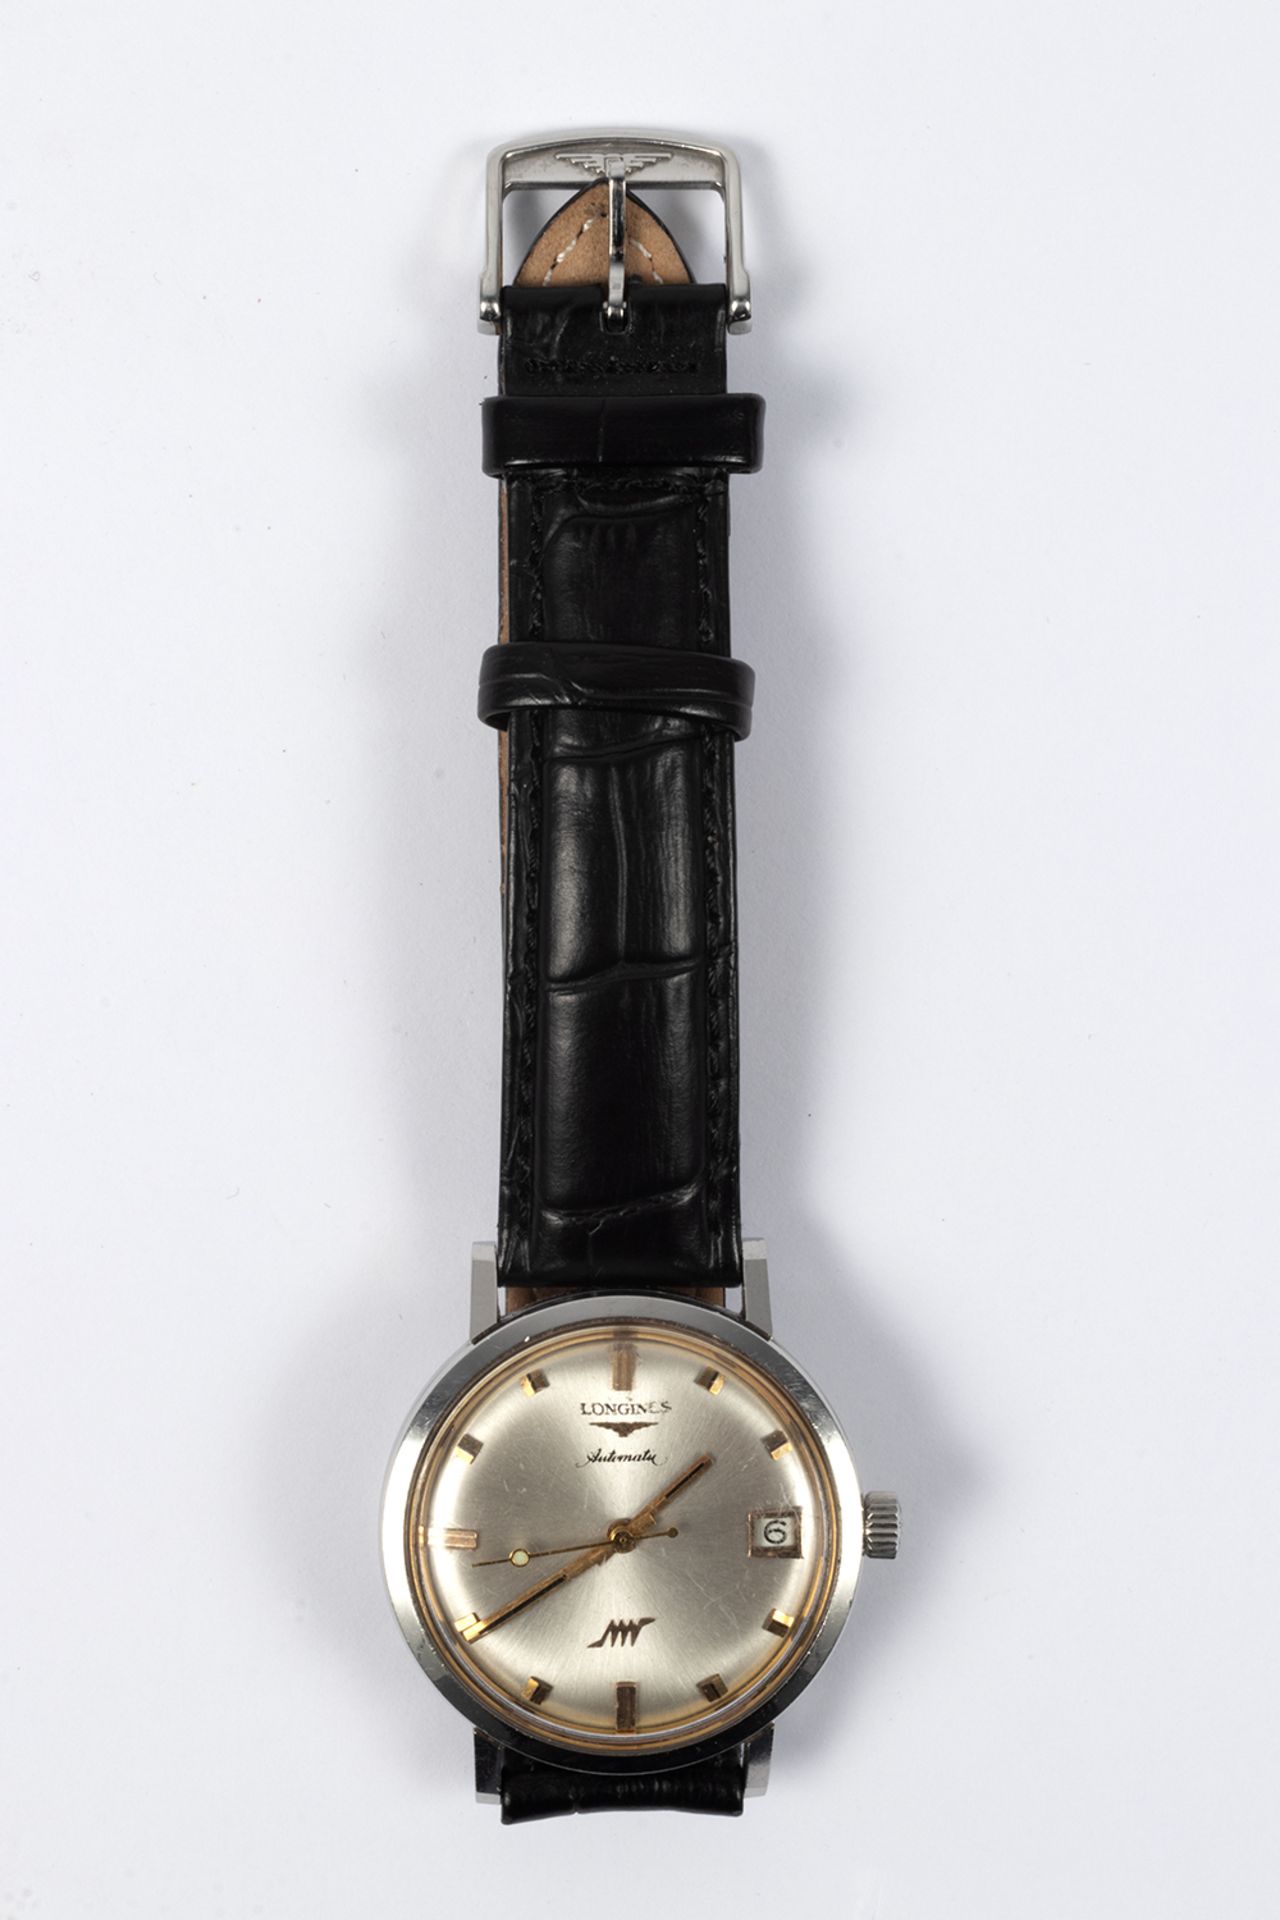 Longines men's wristwatch. In steel and non-original leather strap